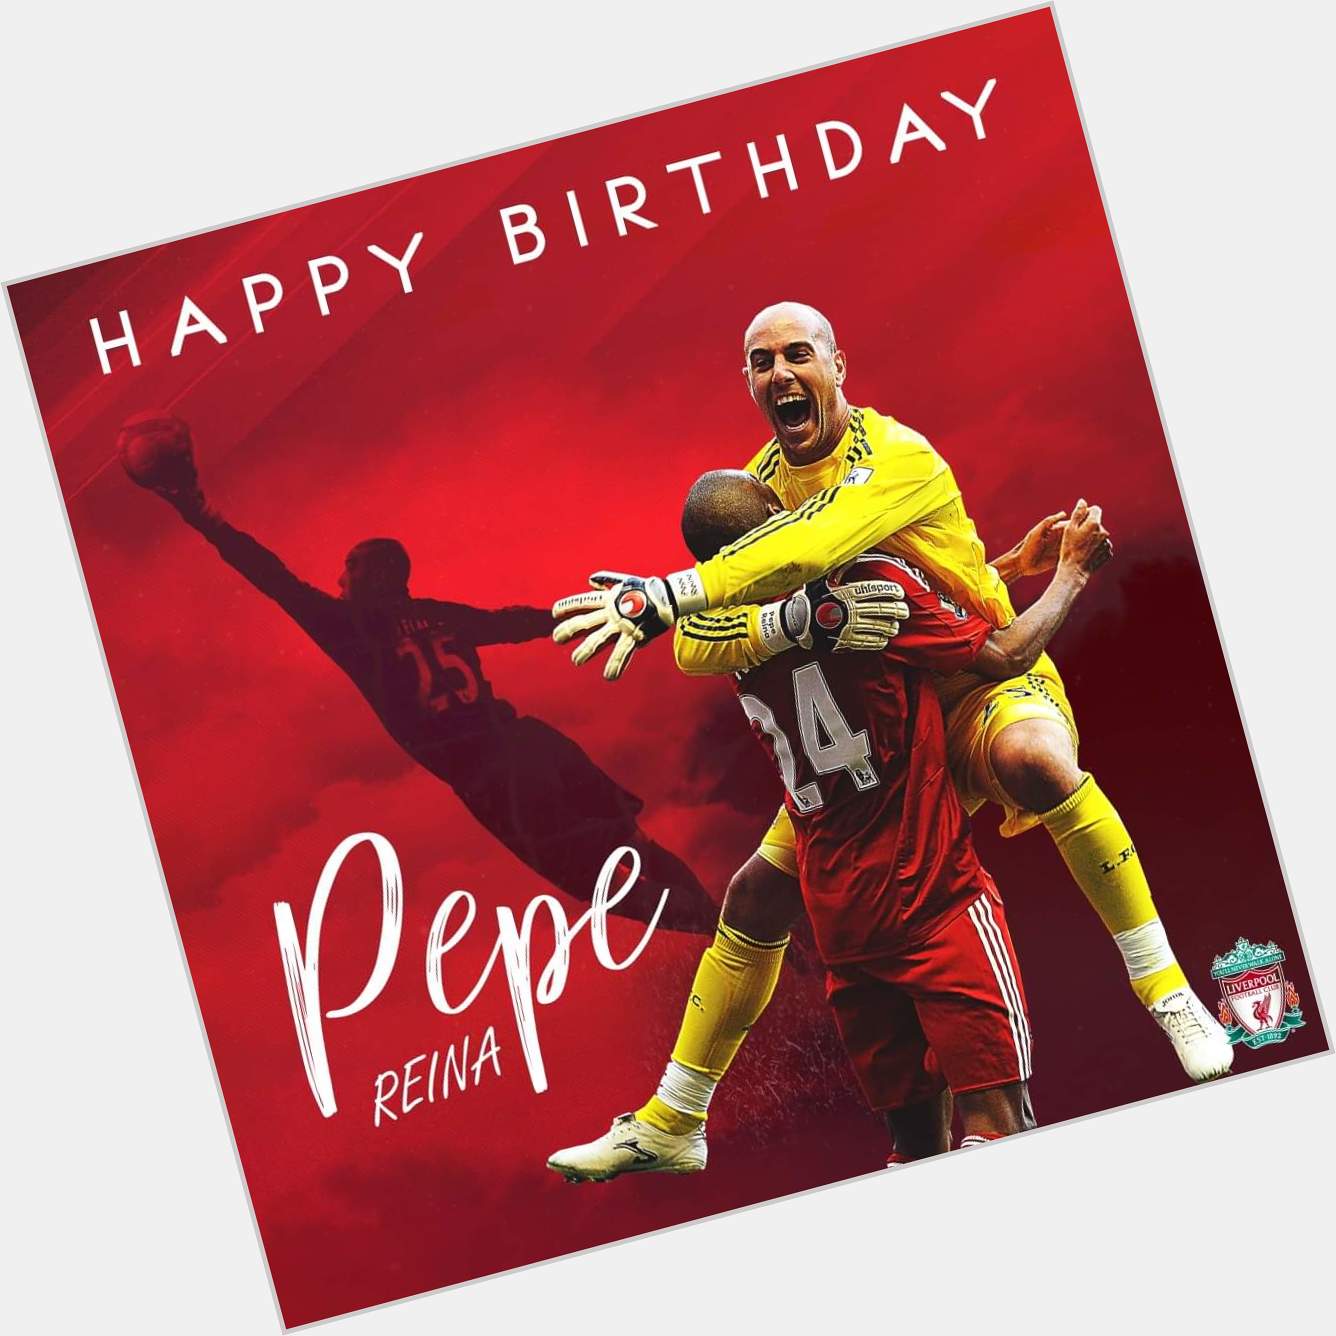 Adored by the Reds Happy birthday, Pepe Reina 